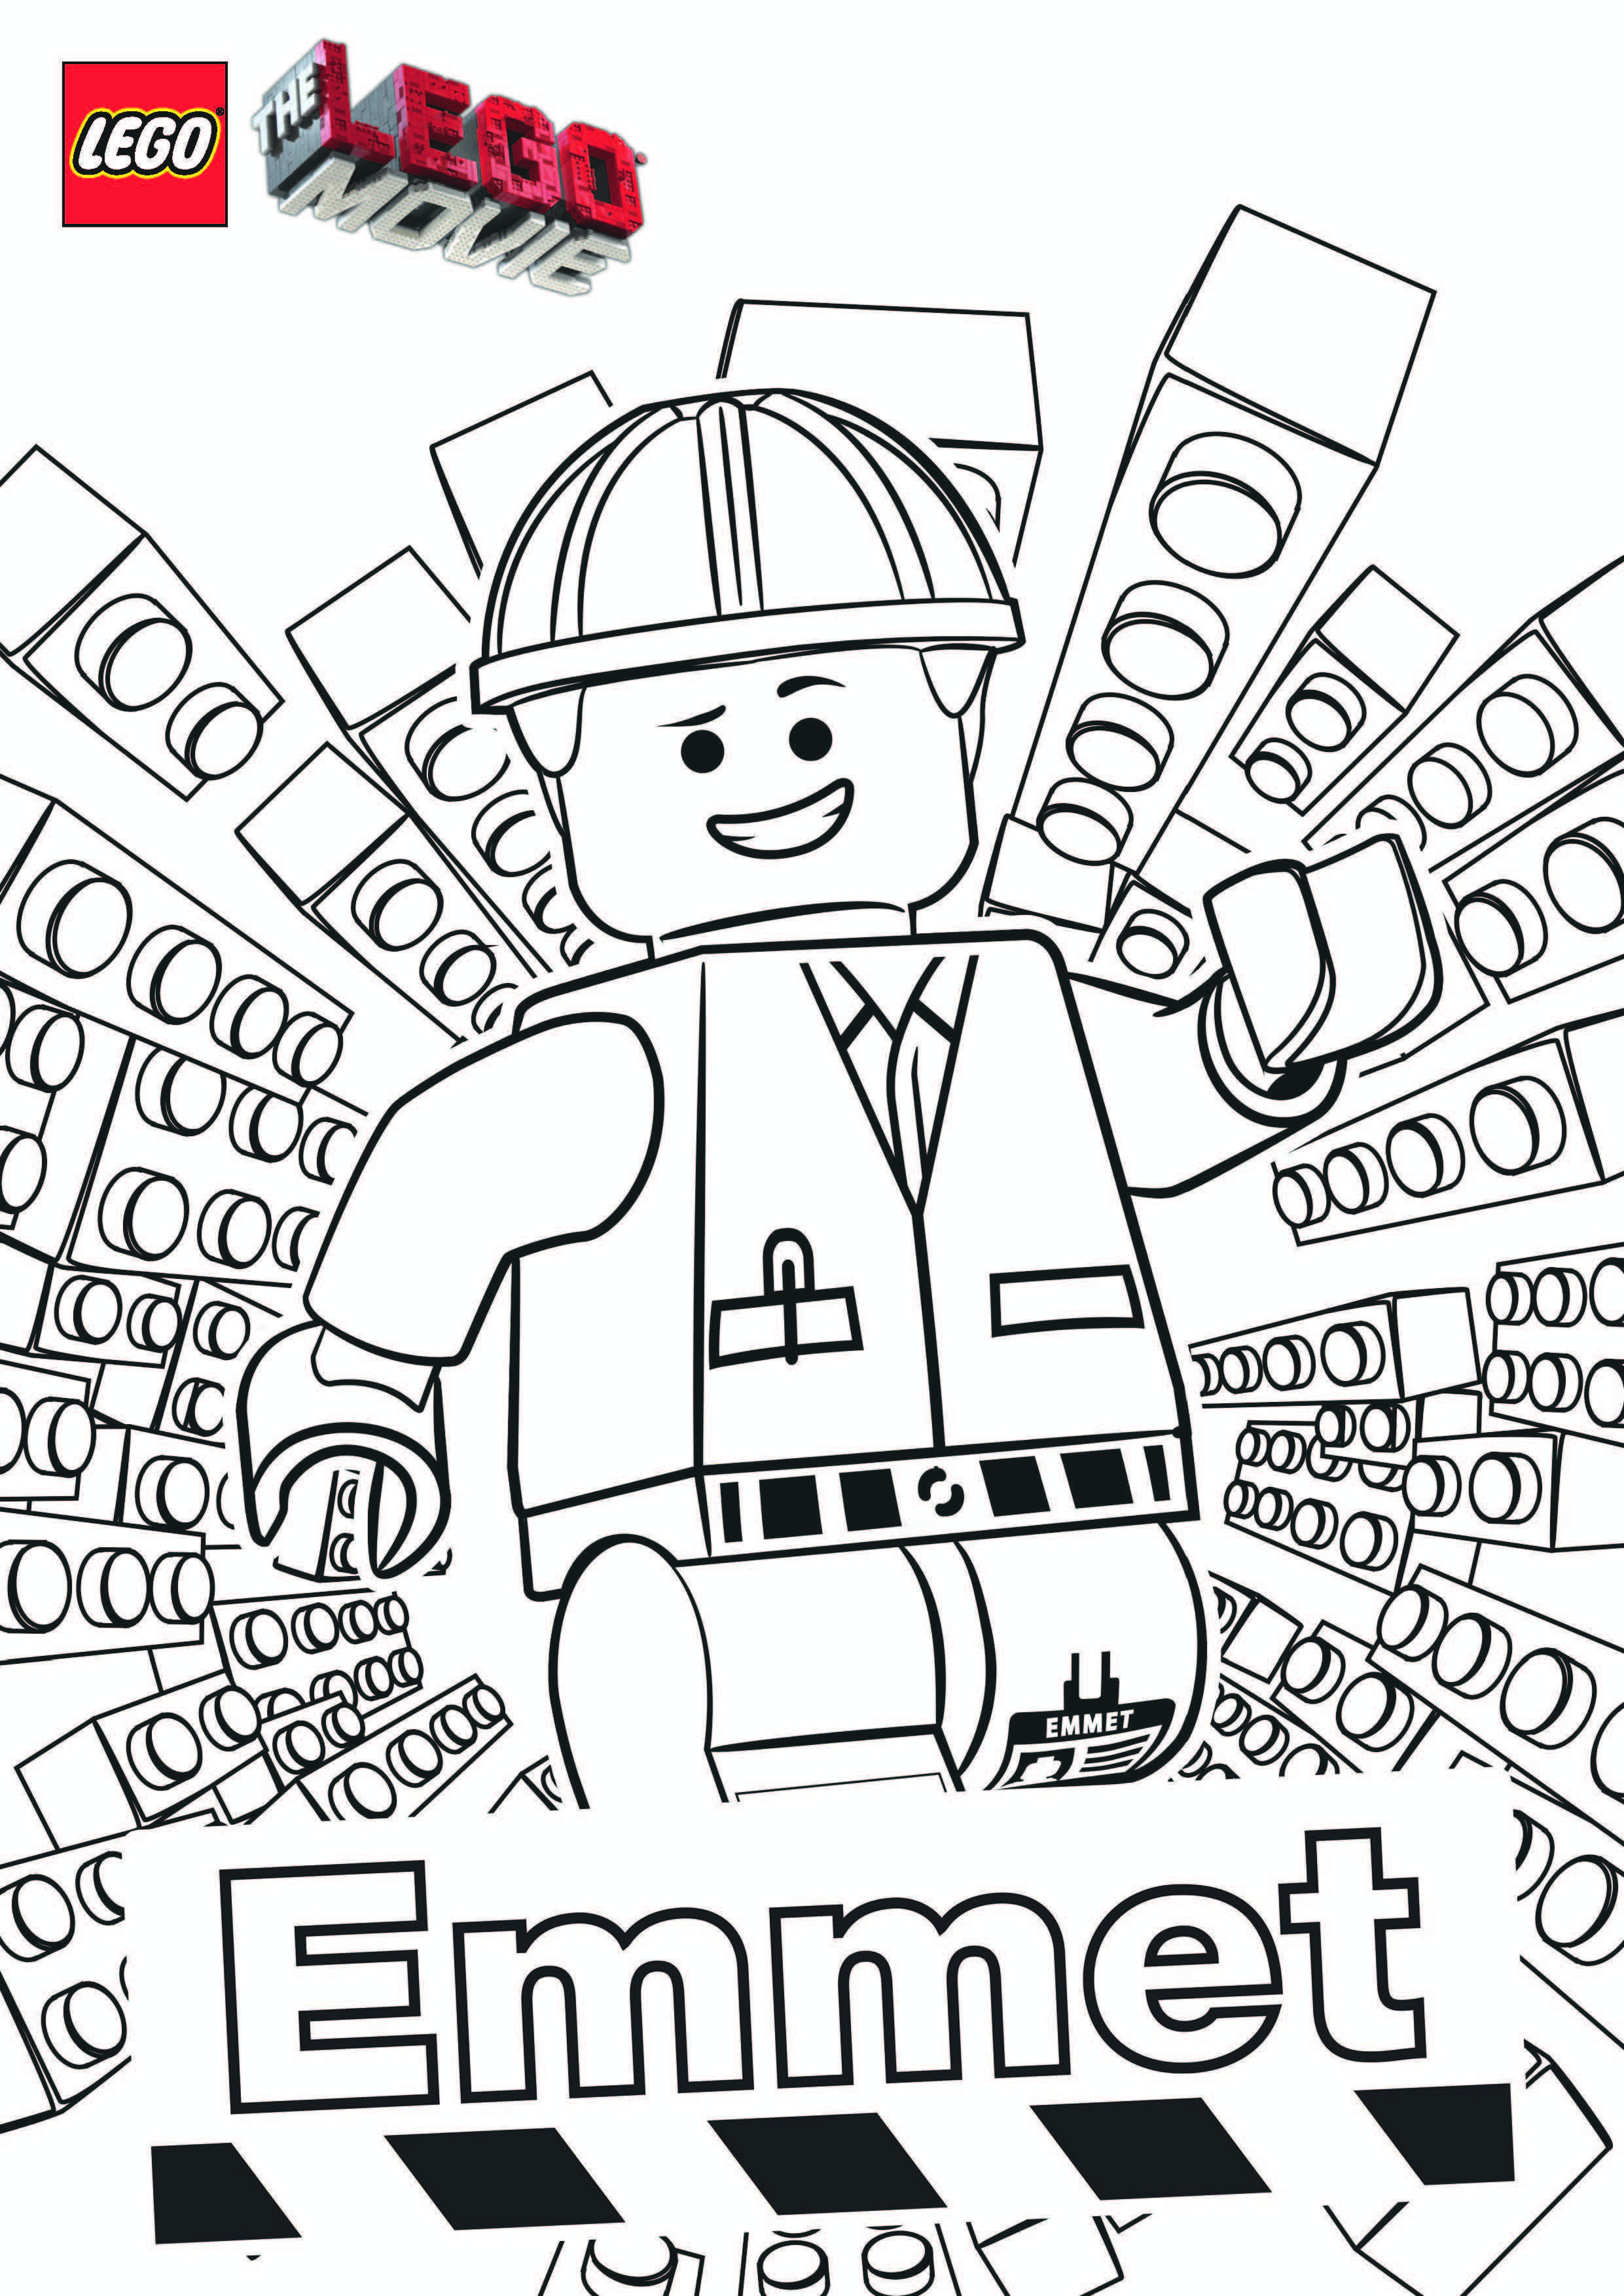 Lego Printable Coloring Pages
 The Lego Movie Free Printables Coloring Pages Activities